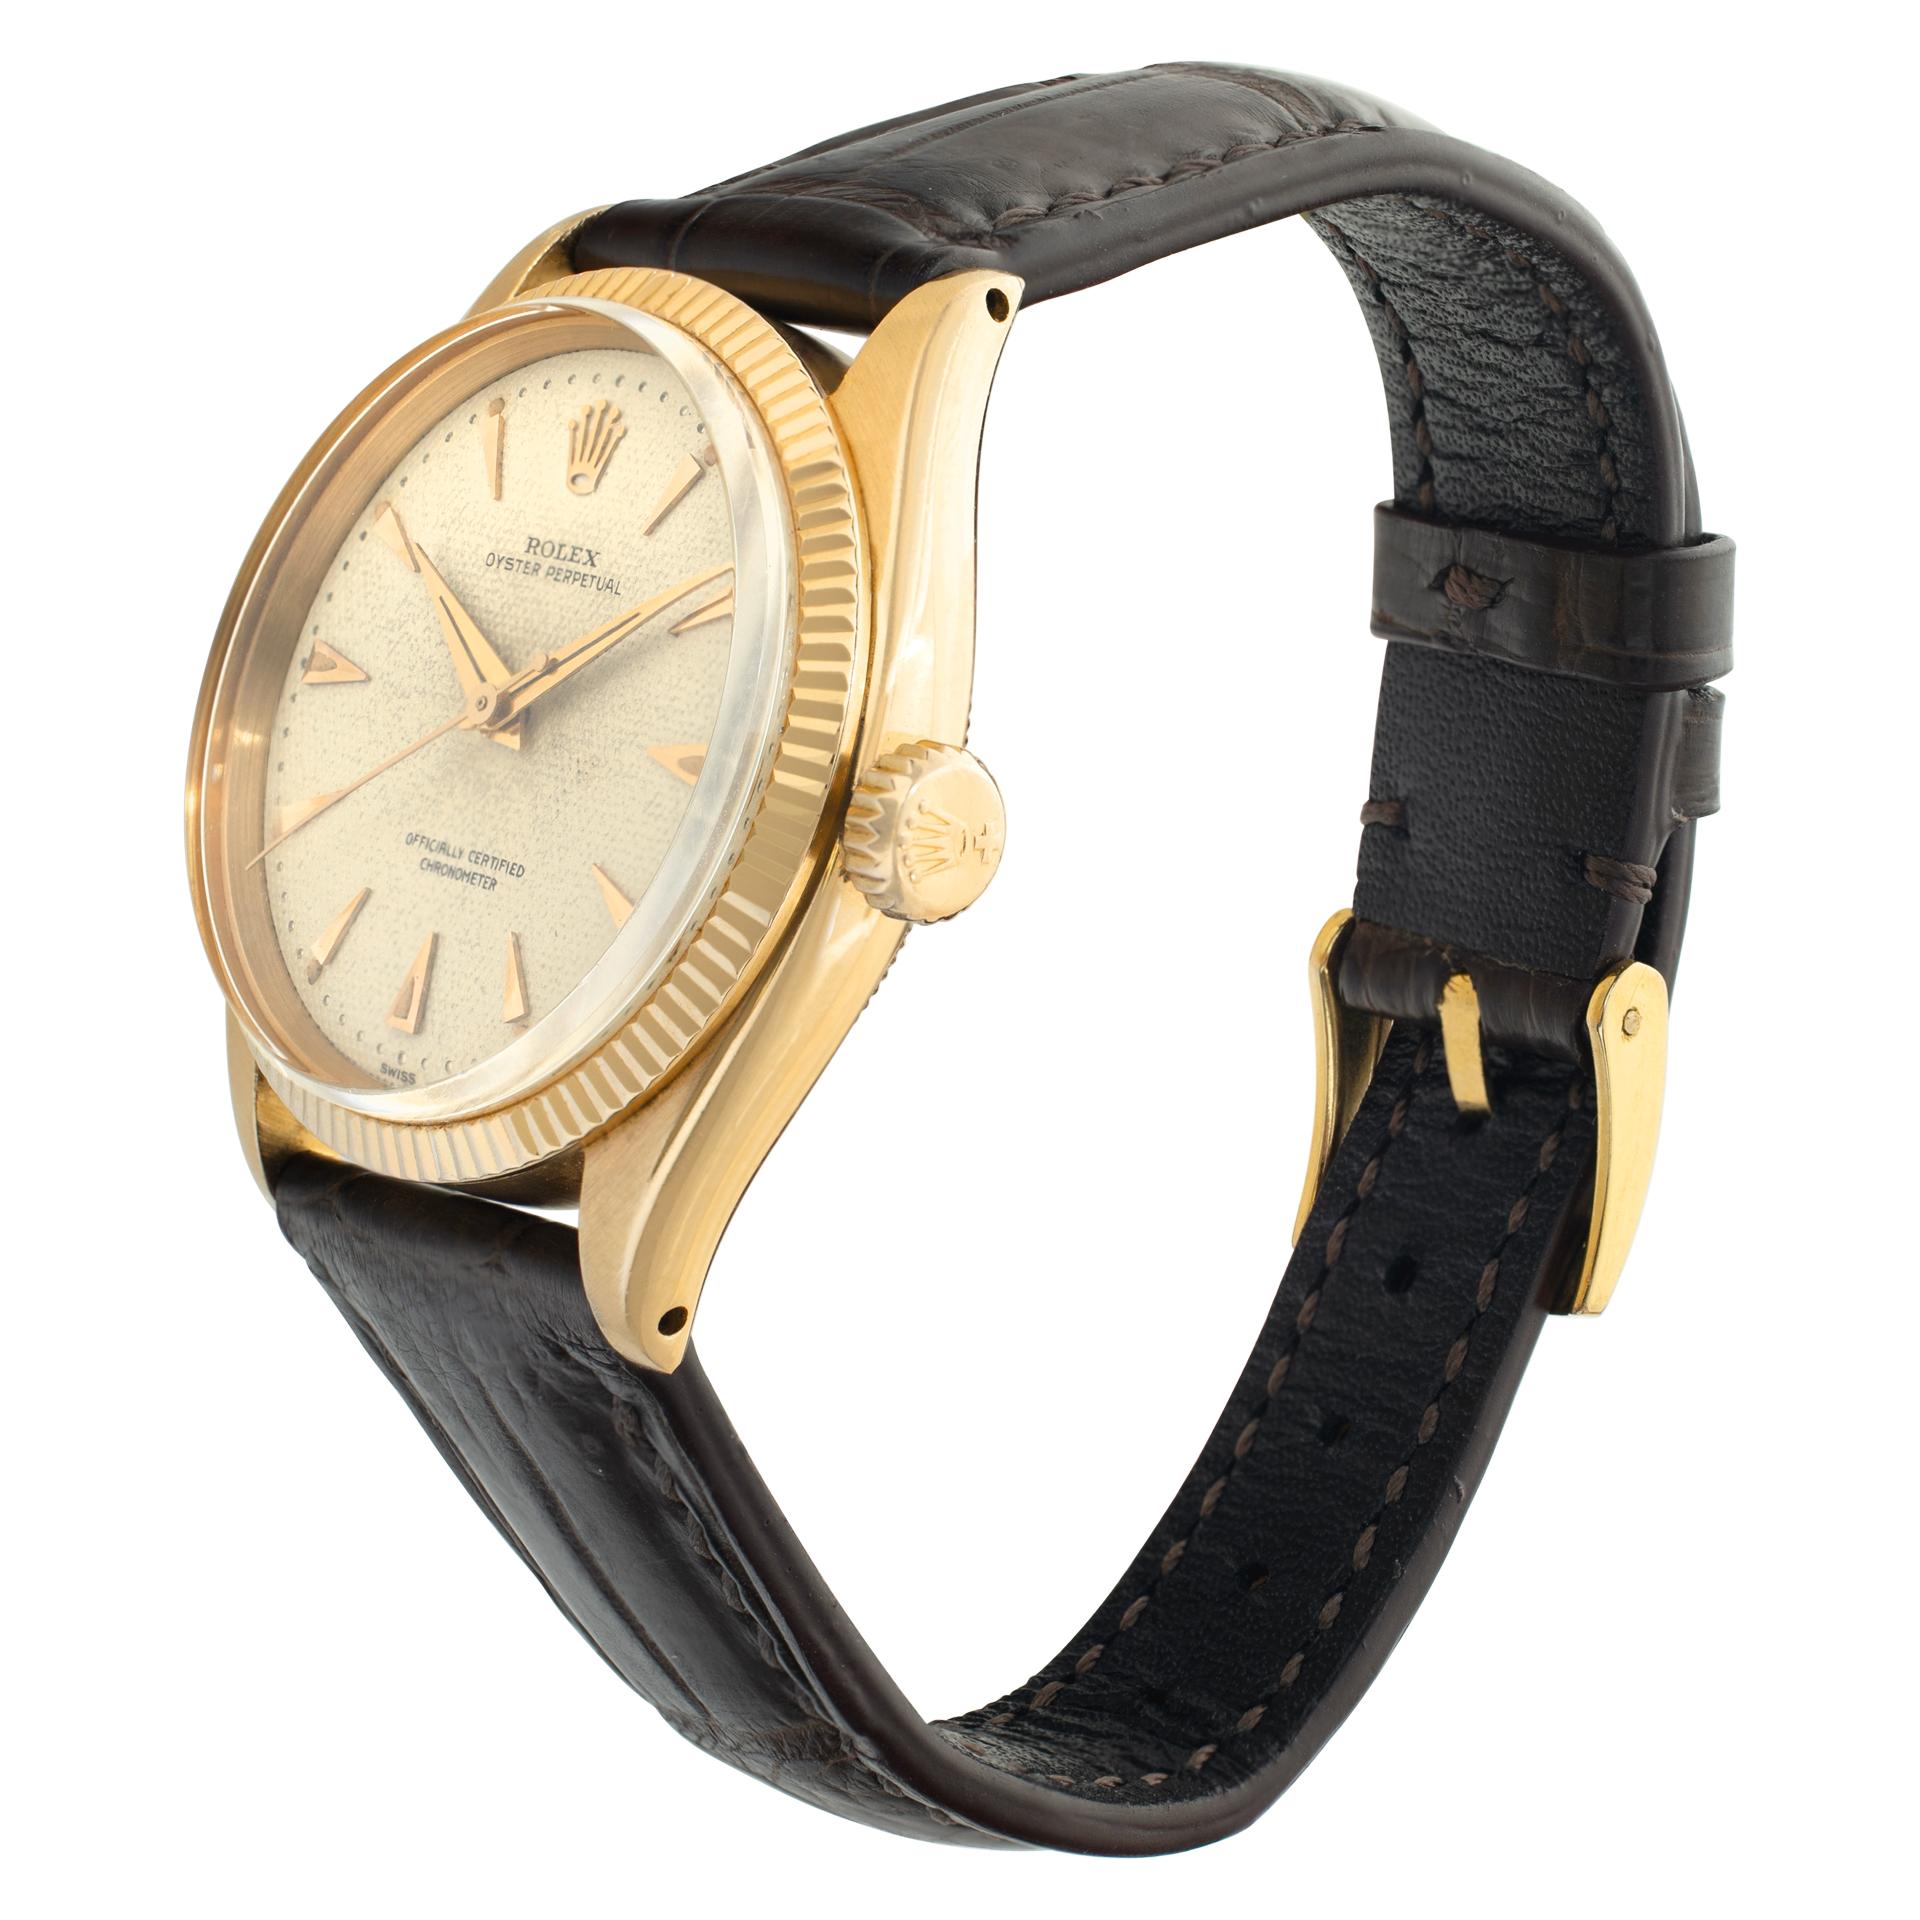 Vintage Rolex Oyster Perpetual in 18k rose gold with Honeycomb dial on a European leather strap with tang buckle. Auto w/ sweep seconds. 34 mm case size. Ref 6285. Circa 1954. Fine Pre-owned Rolex Watch.

 Certified preowned Vintage Rolex Oyster